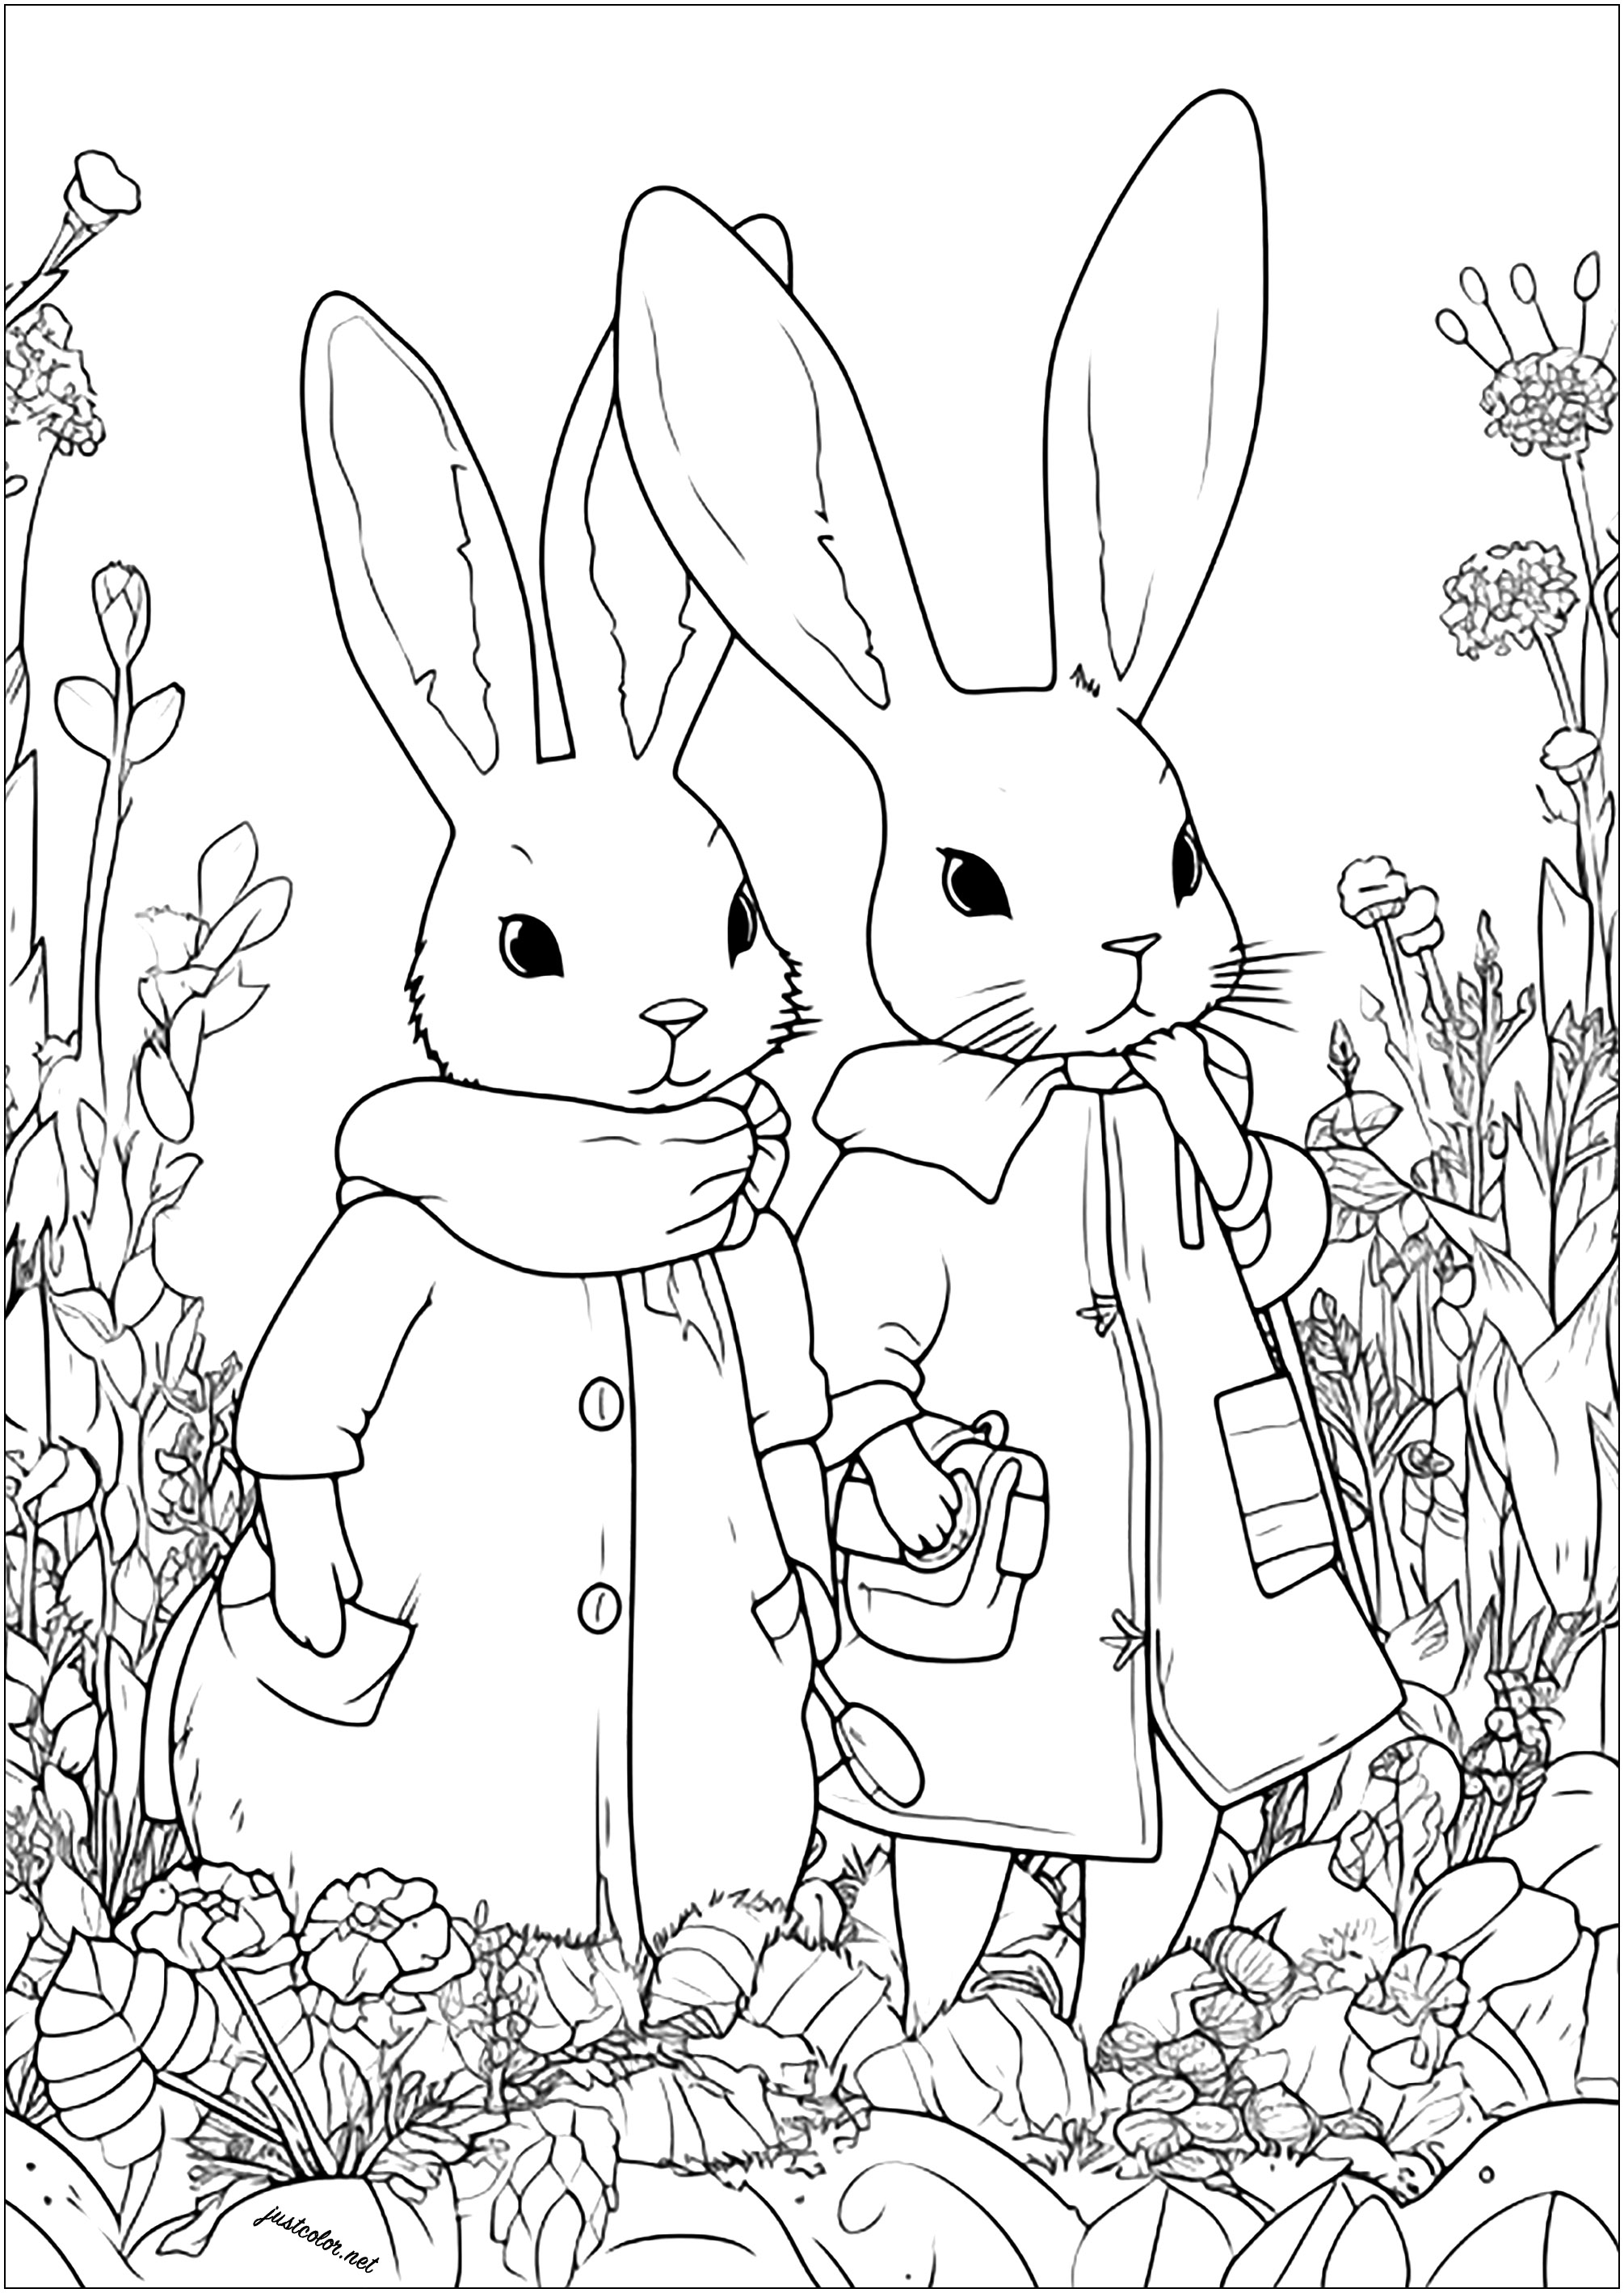 Two adventurous rabbits in a field of flowers. Rabbits drawn with a unique style, looking ready to go on an adventure...